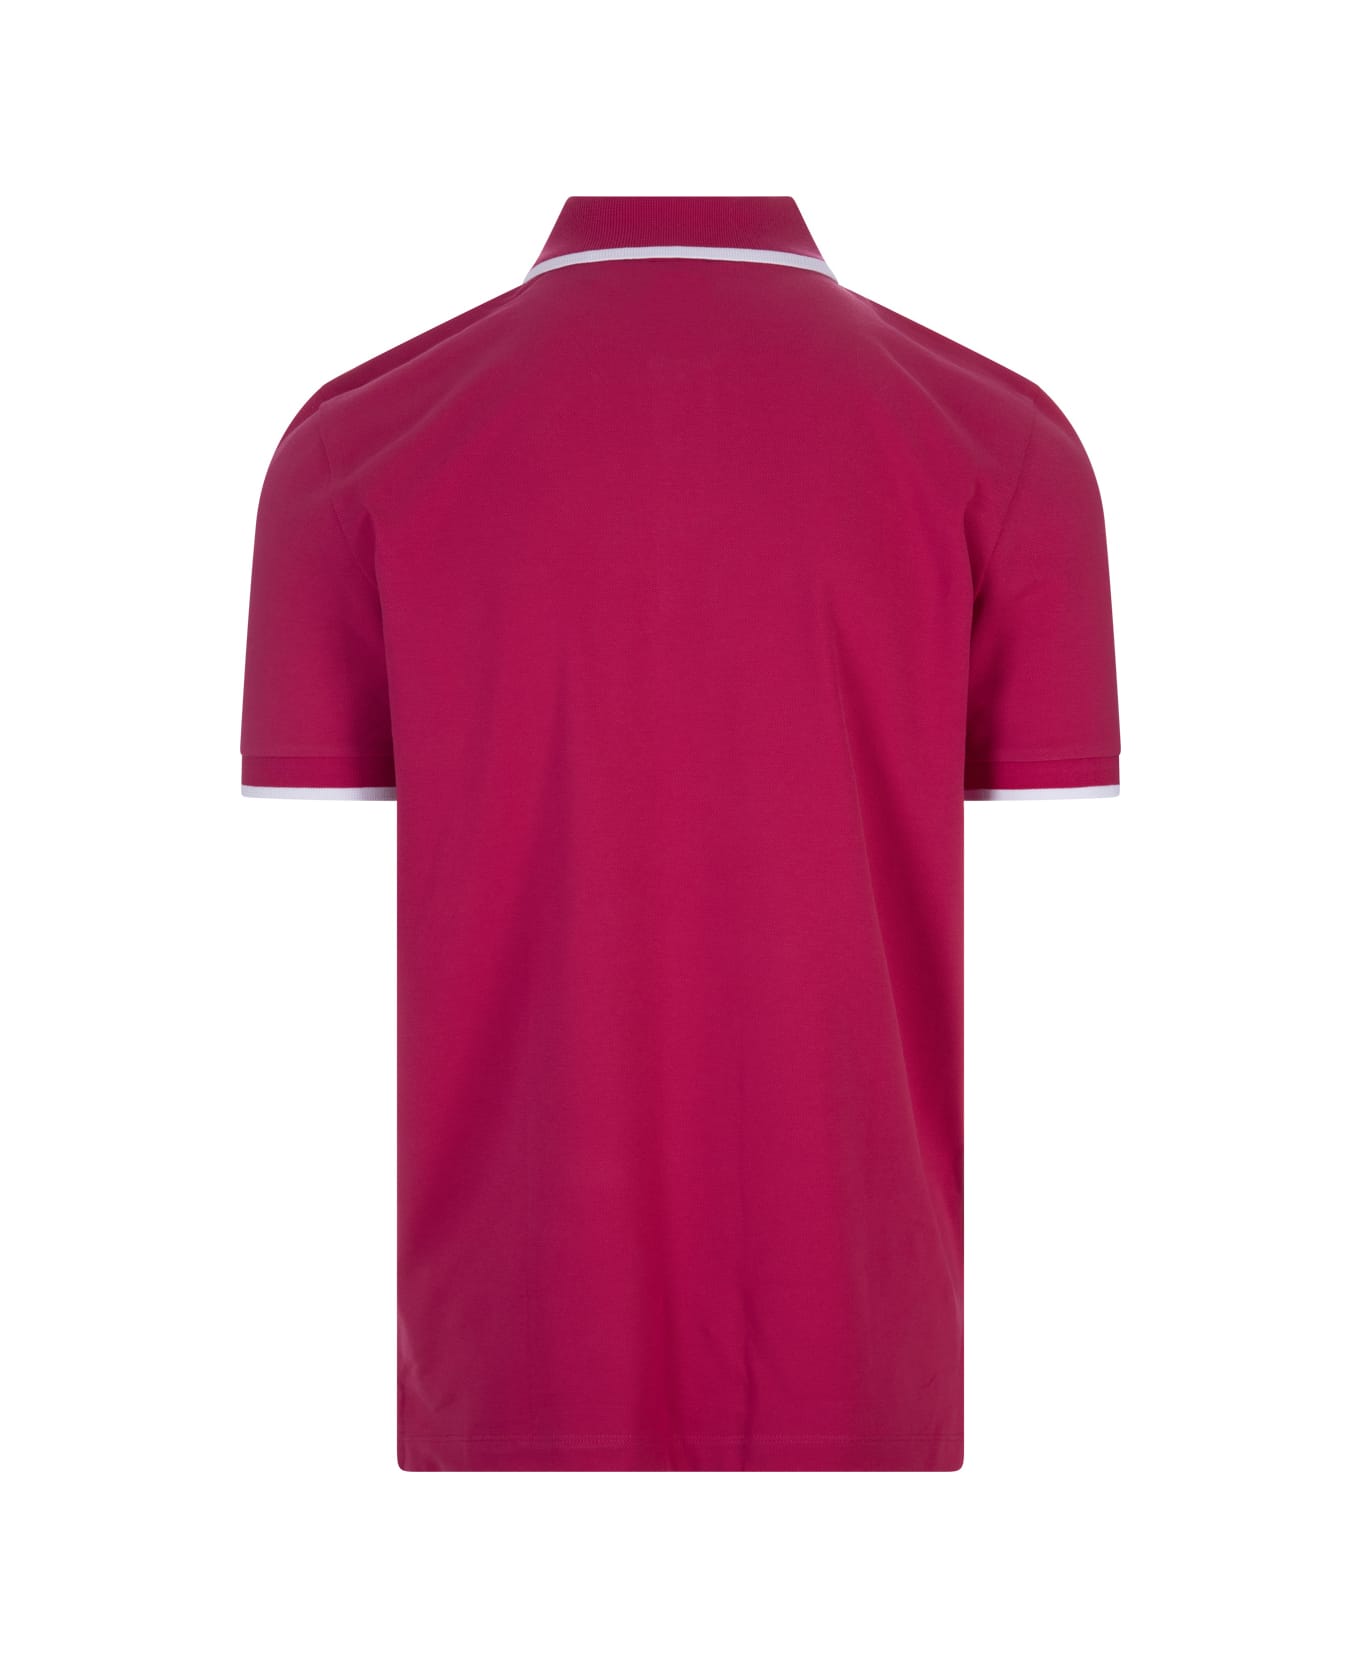 Hugo Boss Fuchsia Slim Fit Polo Shirt With Striped Collar - Red